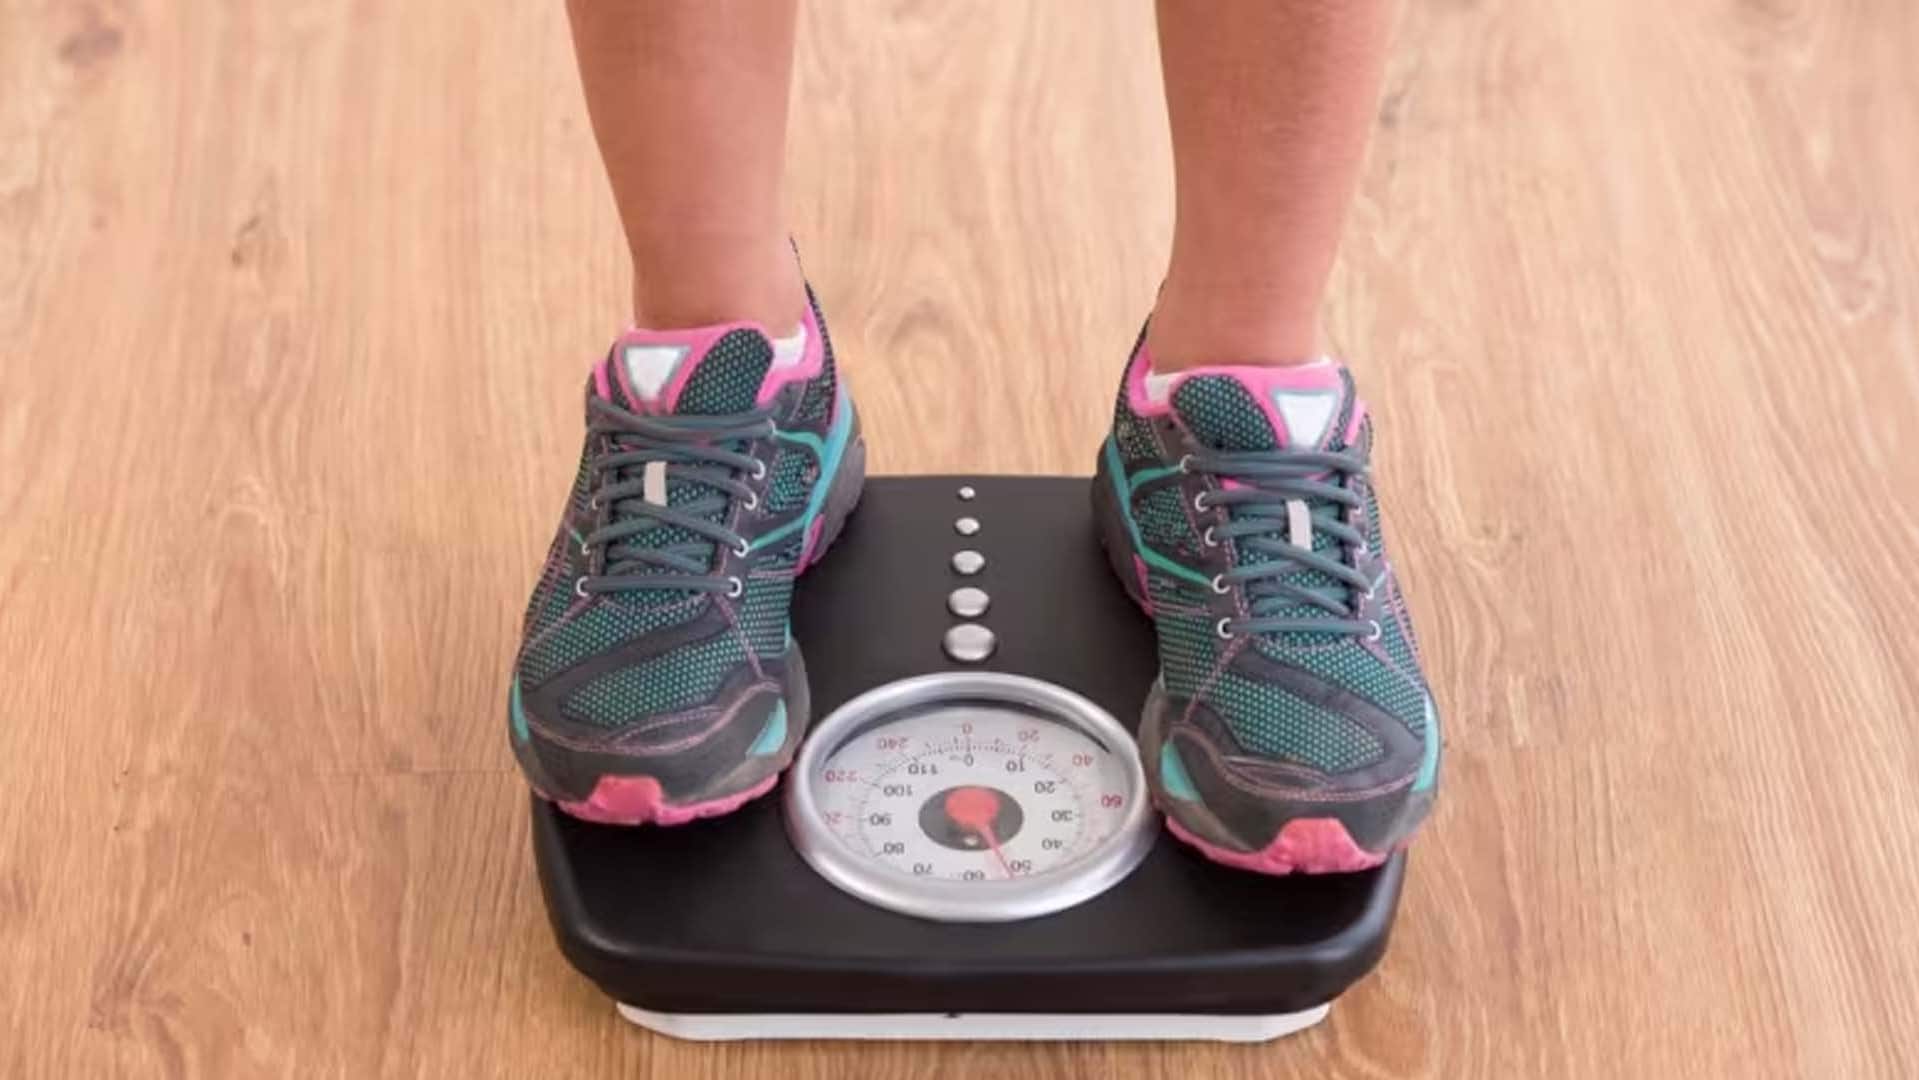 bmi is an imperfect way to measure health but replacing it is complicated